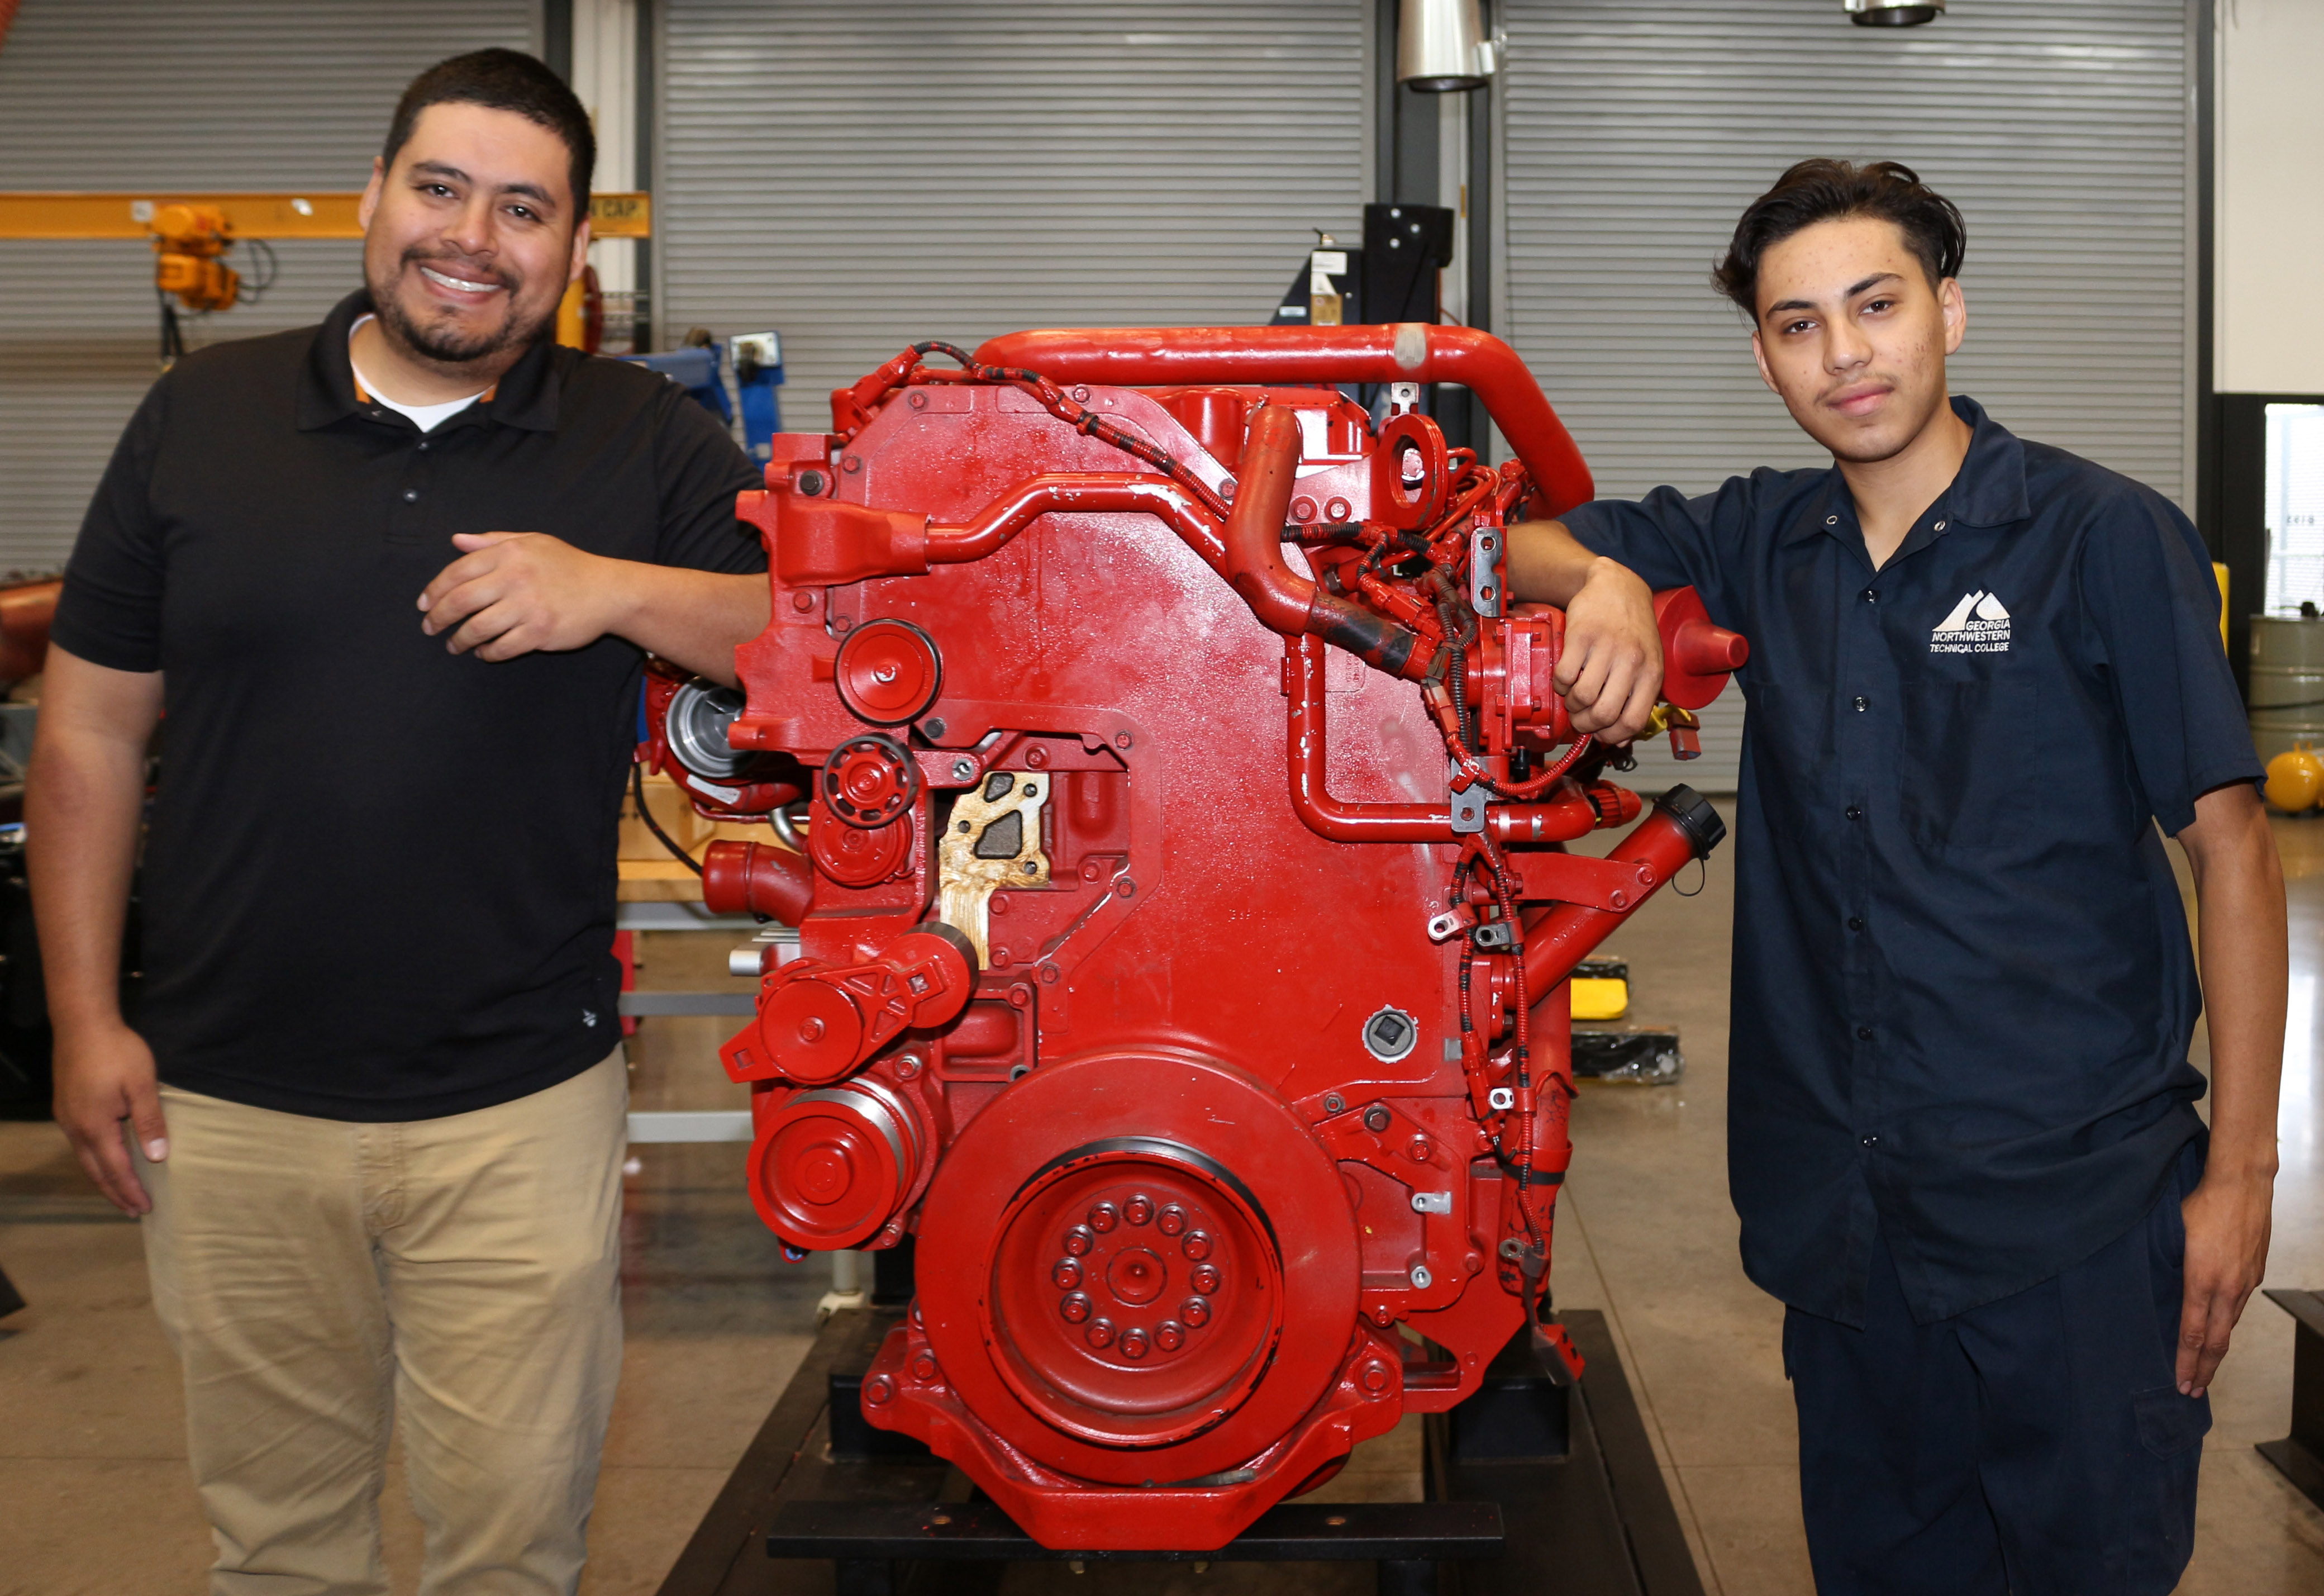 Salvador Gonzalez, program director and instructor of Diesel Equipment Technology at Georgia Northwestern Technical College (GNTC), (right) congratulates Cristian Tirador Cervantes, GNTC student and recipient of the Diesel Equipment Technology Scholarship. Tirador Cervantes said he will use the funds to pay for tuition as he pursues his Diesel Equipment Technology diploma; he expects to graduate in December 2023. Gonzales was named GNTC’s 2023 Rick Perkins Instructor of the Year and was recently selected as First Runner-Up for the Technical College System of Georgia (TCSG) 2023 Rick Perkins Instructor of the Year.